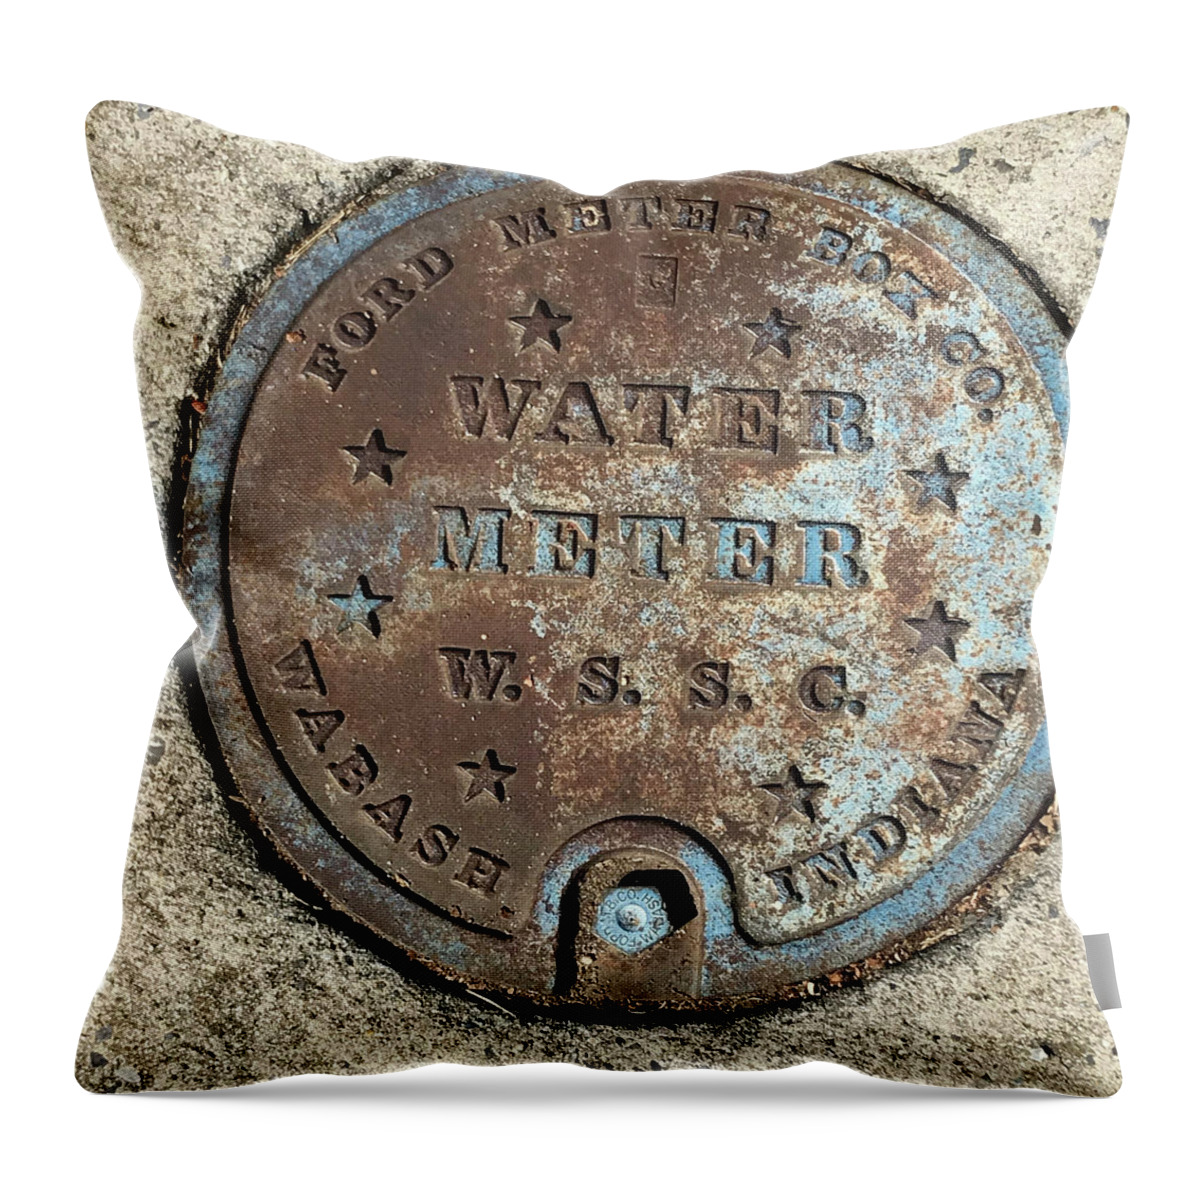 Photograph Throw Pillow featuring the photograph Wabash Water by Richard Wetterauer